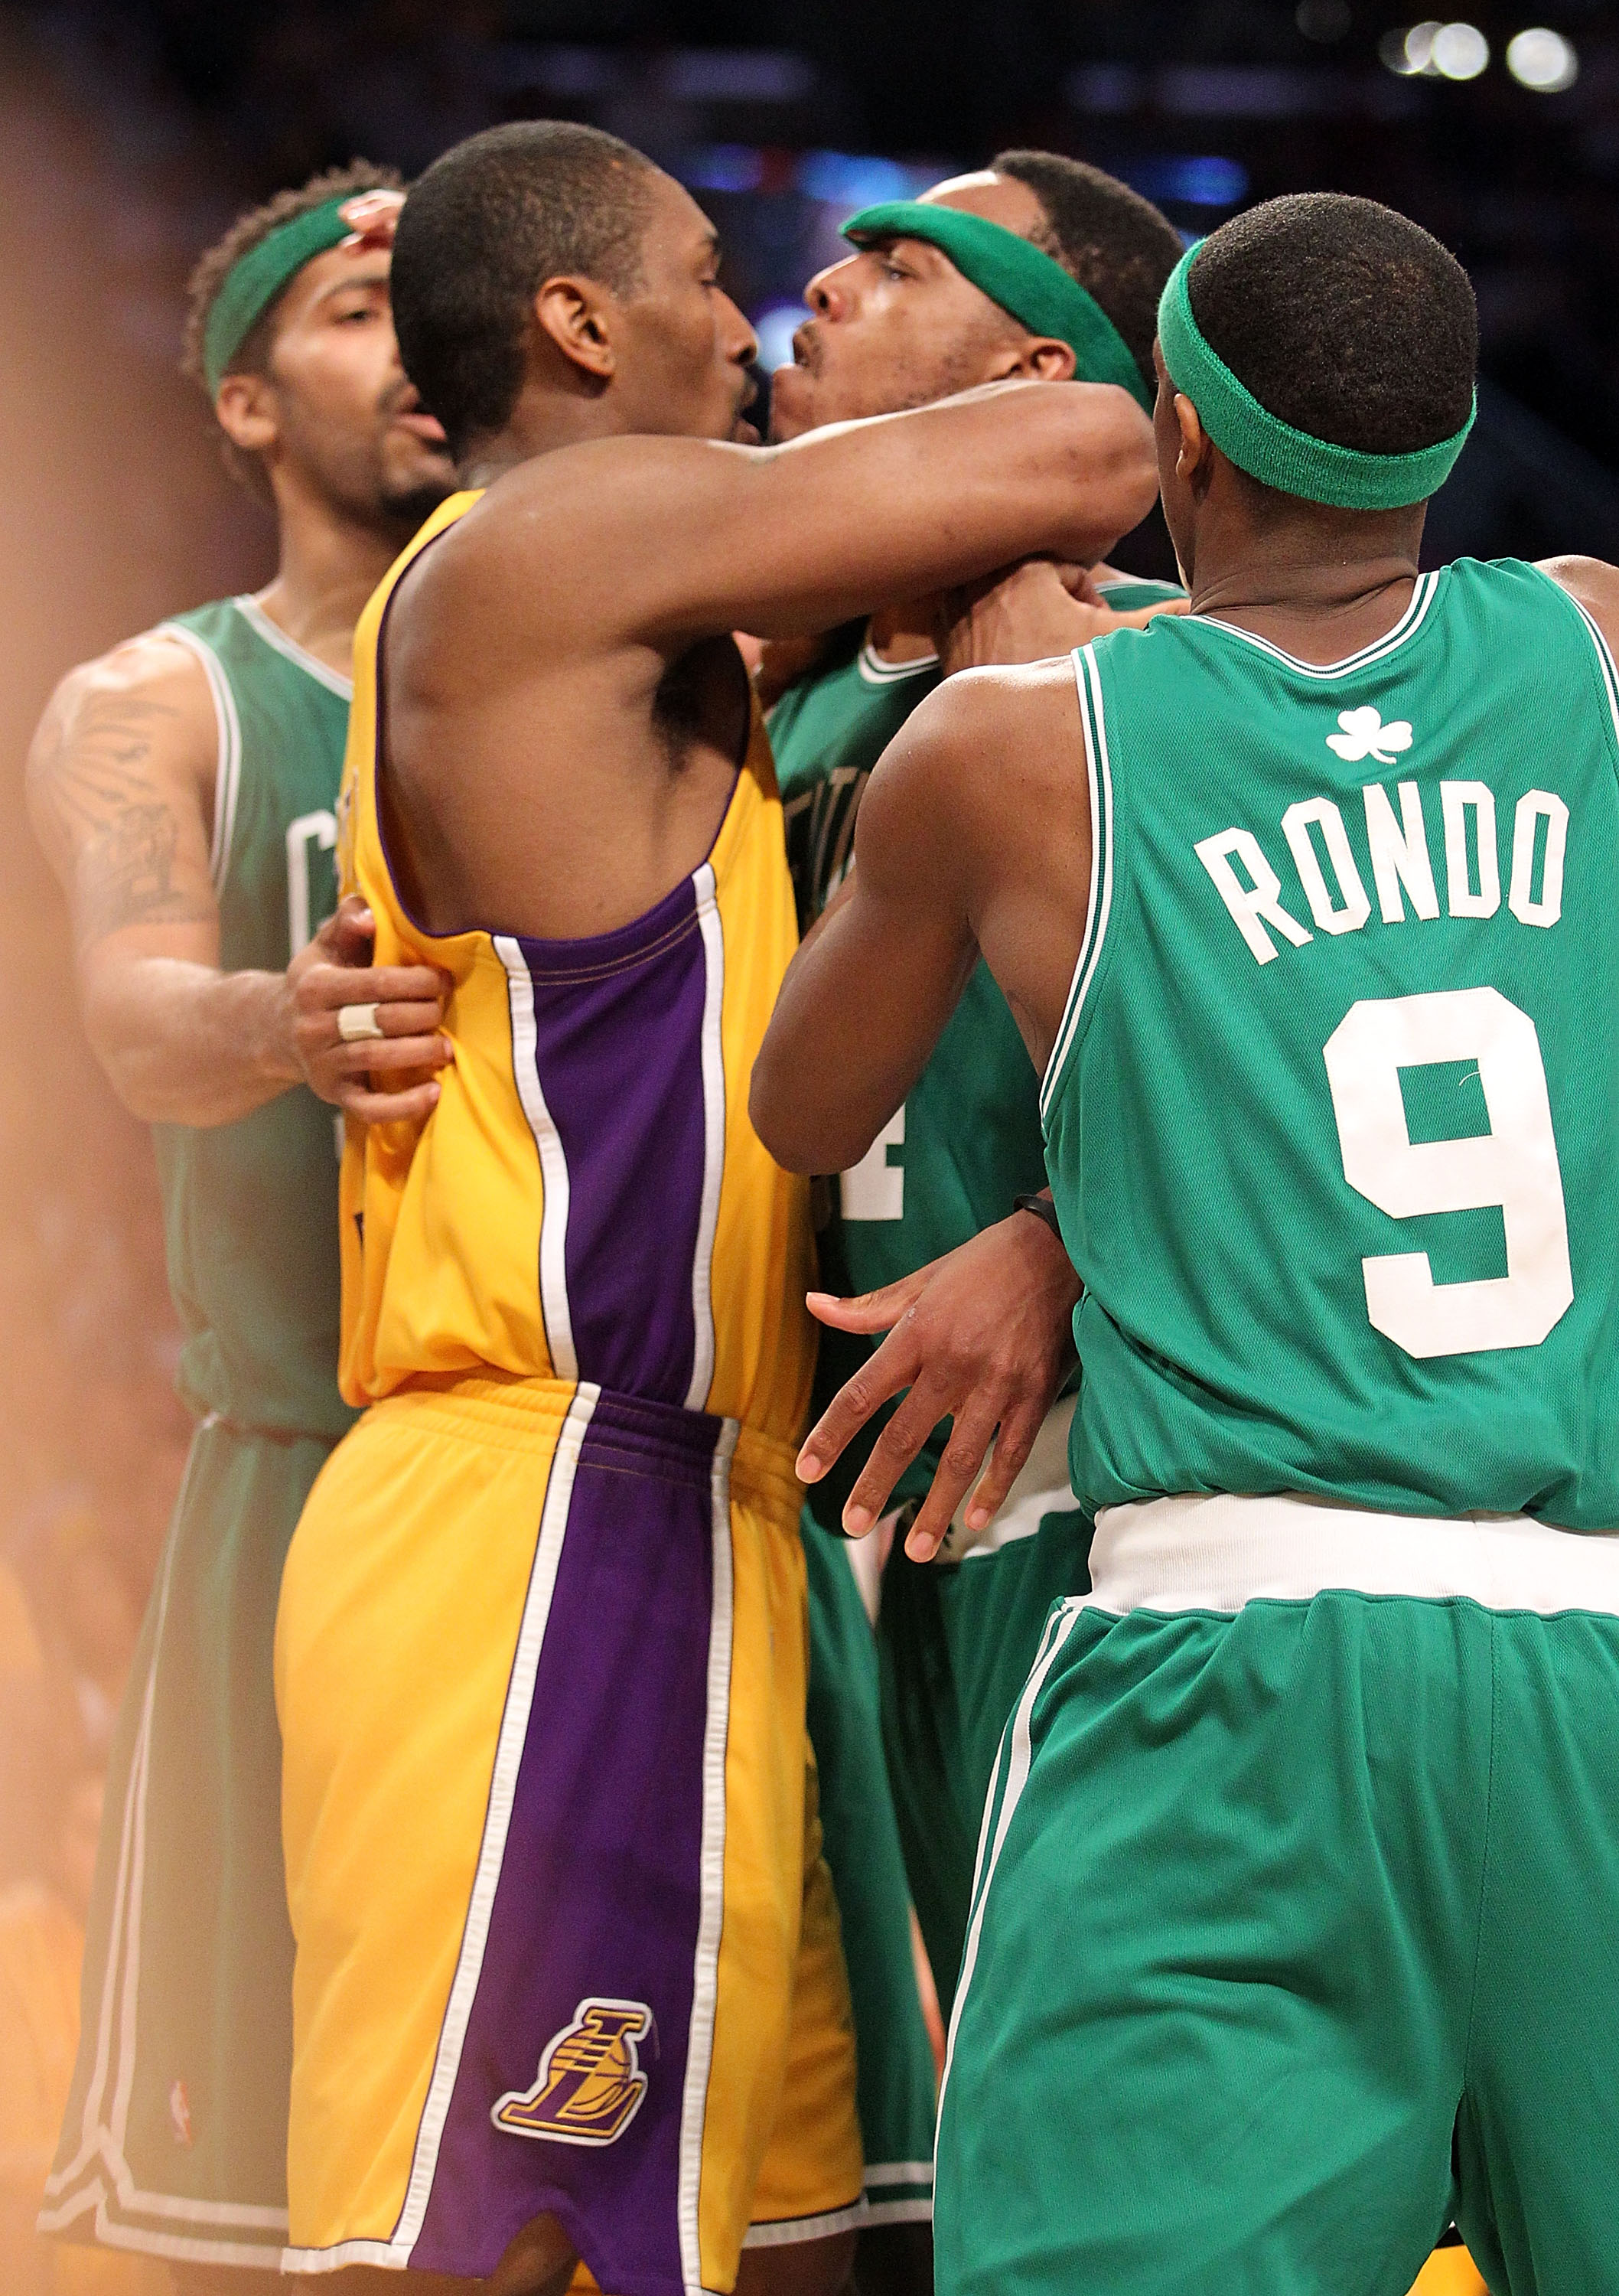 LOS ANGELES, CA - JUNE 17:  Ron Artest #37 of the Los Angeles Lakers and Paul Pierce #34 of the Boston Celtics get in each others face in the second quarter of Game Seven of the 2010 NBA Finals at Staples Center on June 17, 2010 in Los Angeles, California